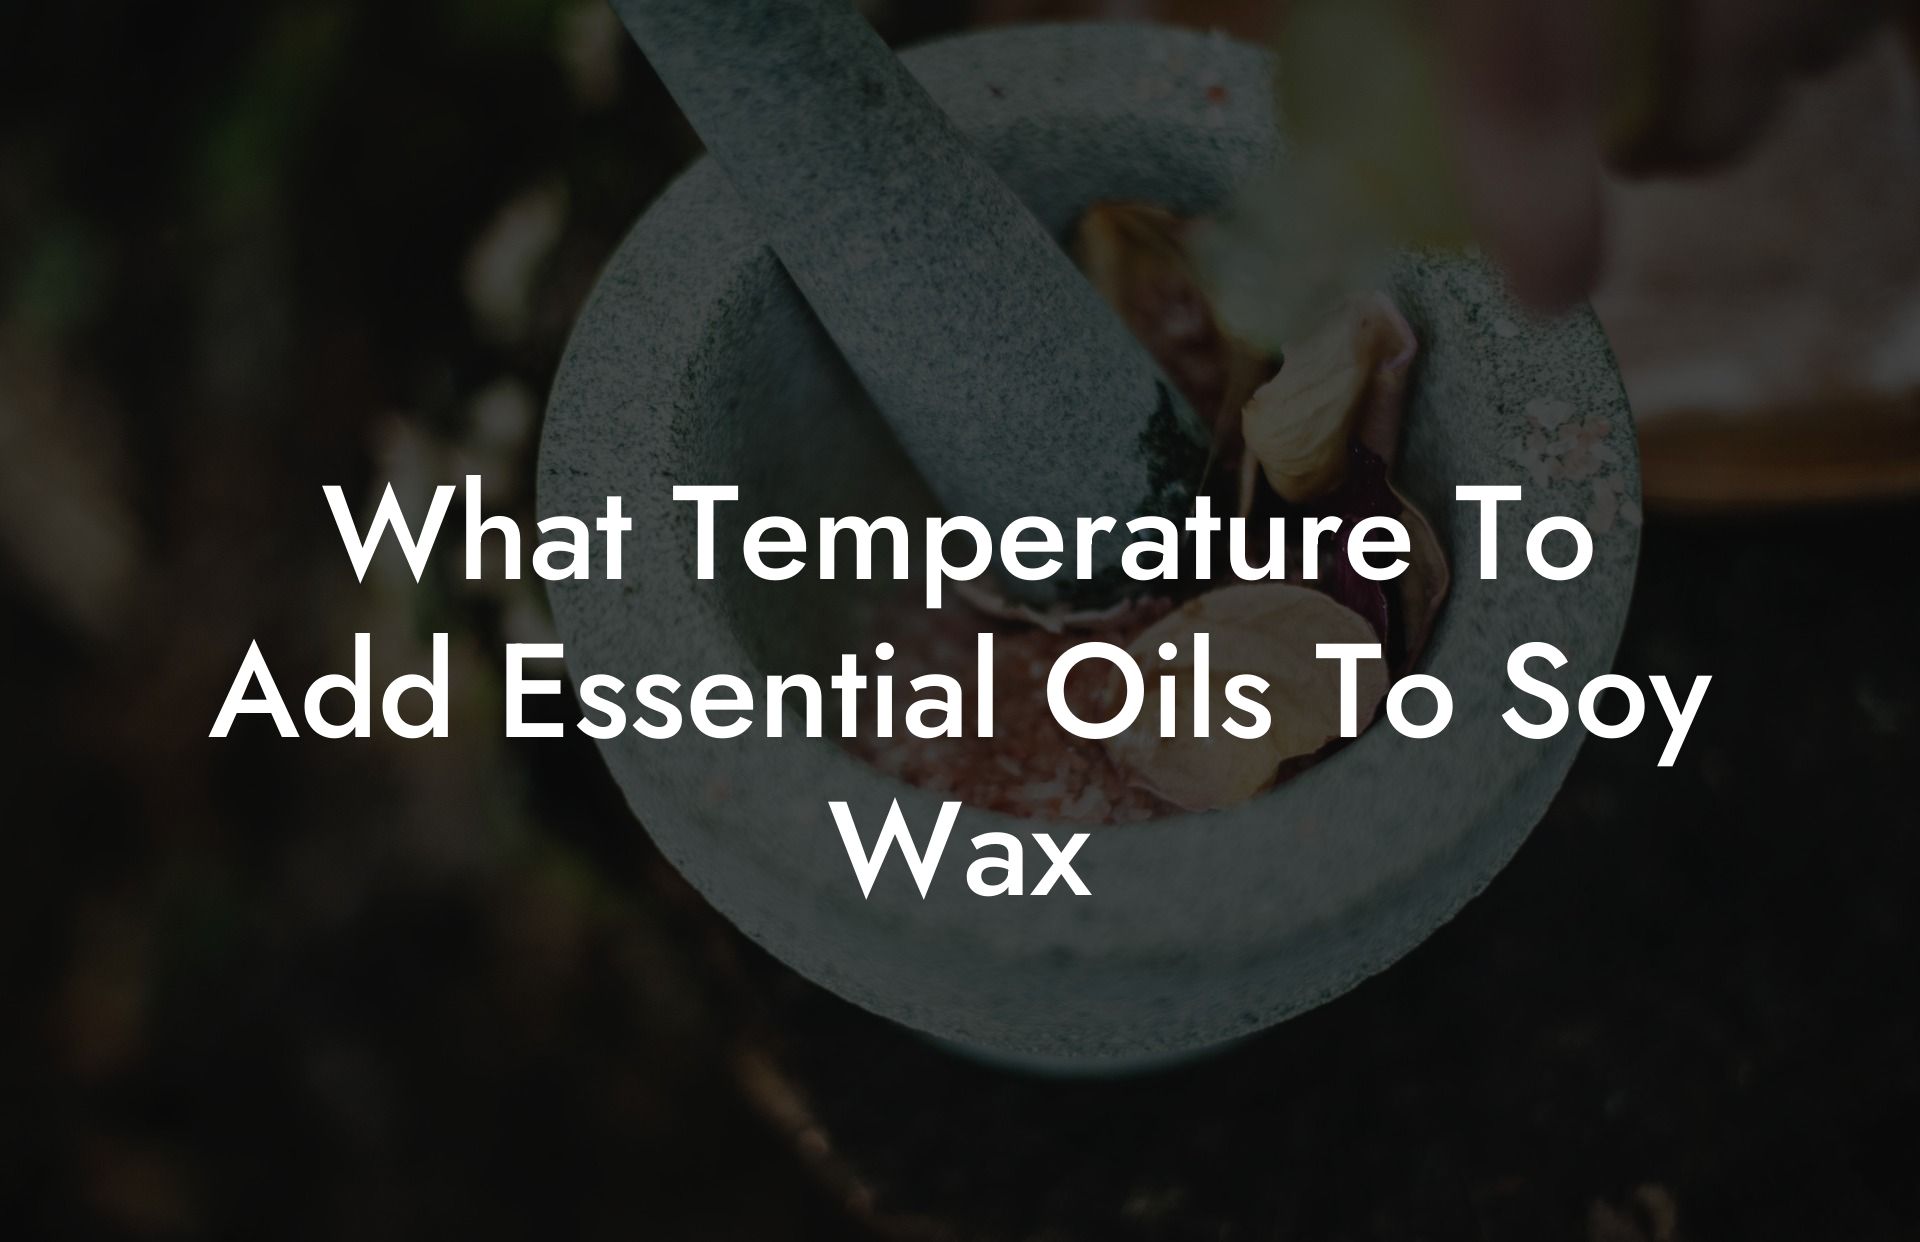 What Temperature To Add Essential Oils To Soy Wax